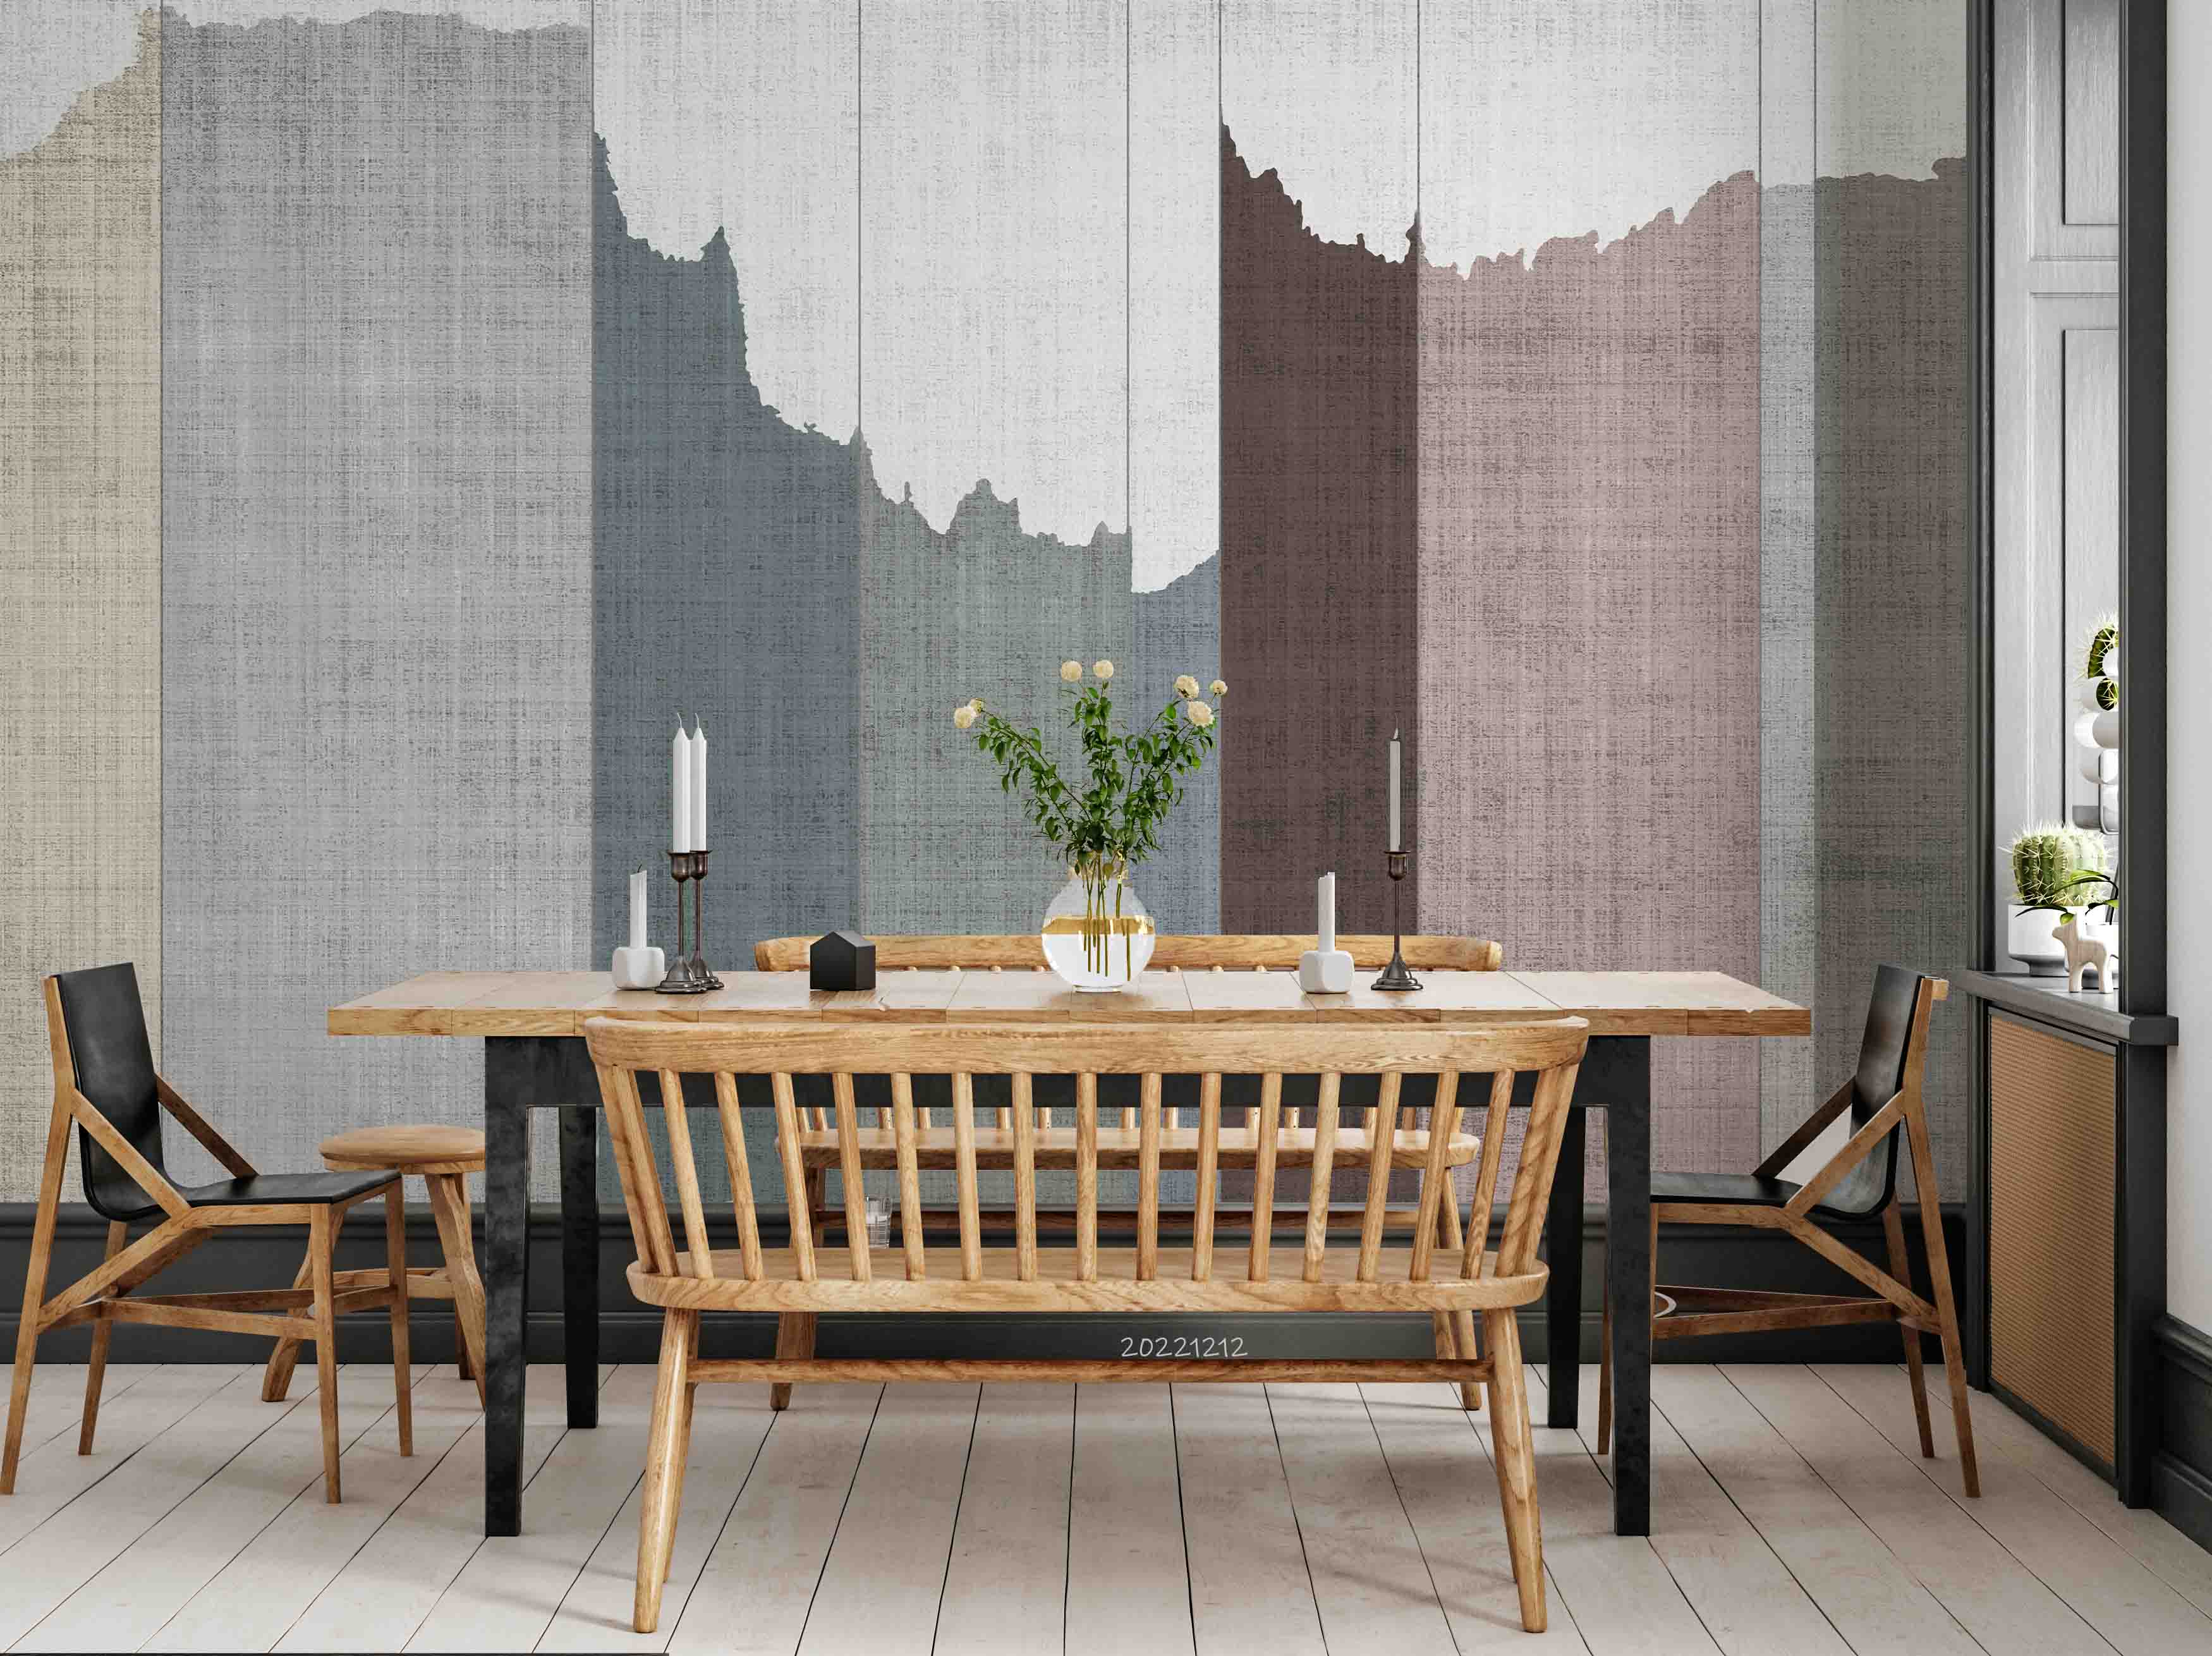 3D Vintage Smudged Knitting Background Wall Mural Wallpaper GD 1773- Jess Art Decoration